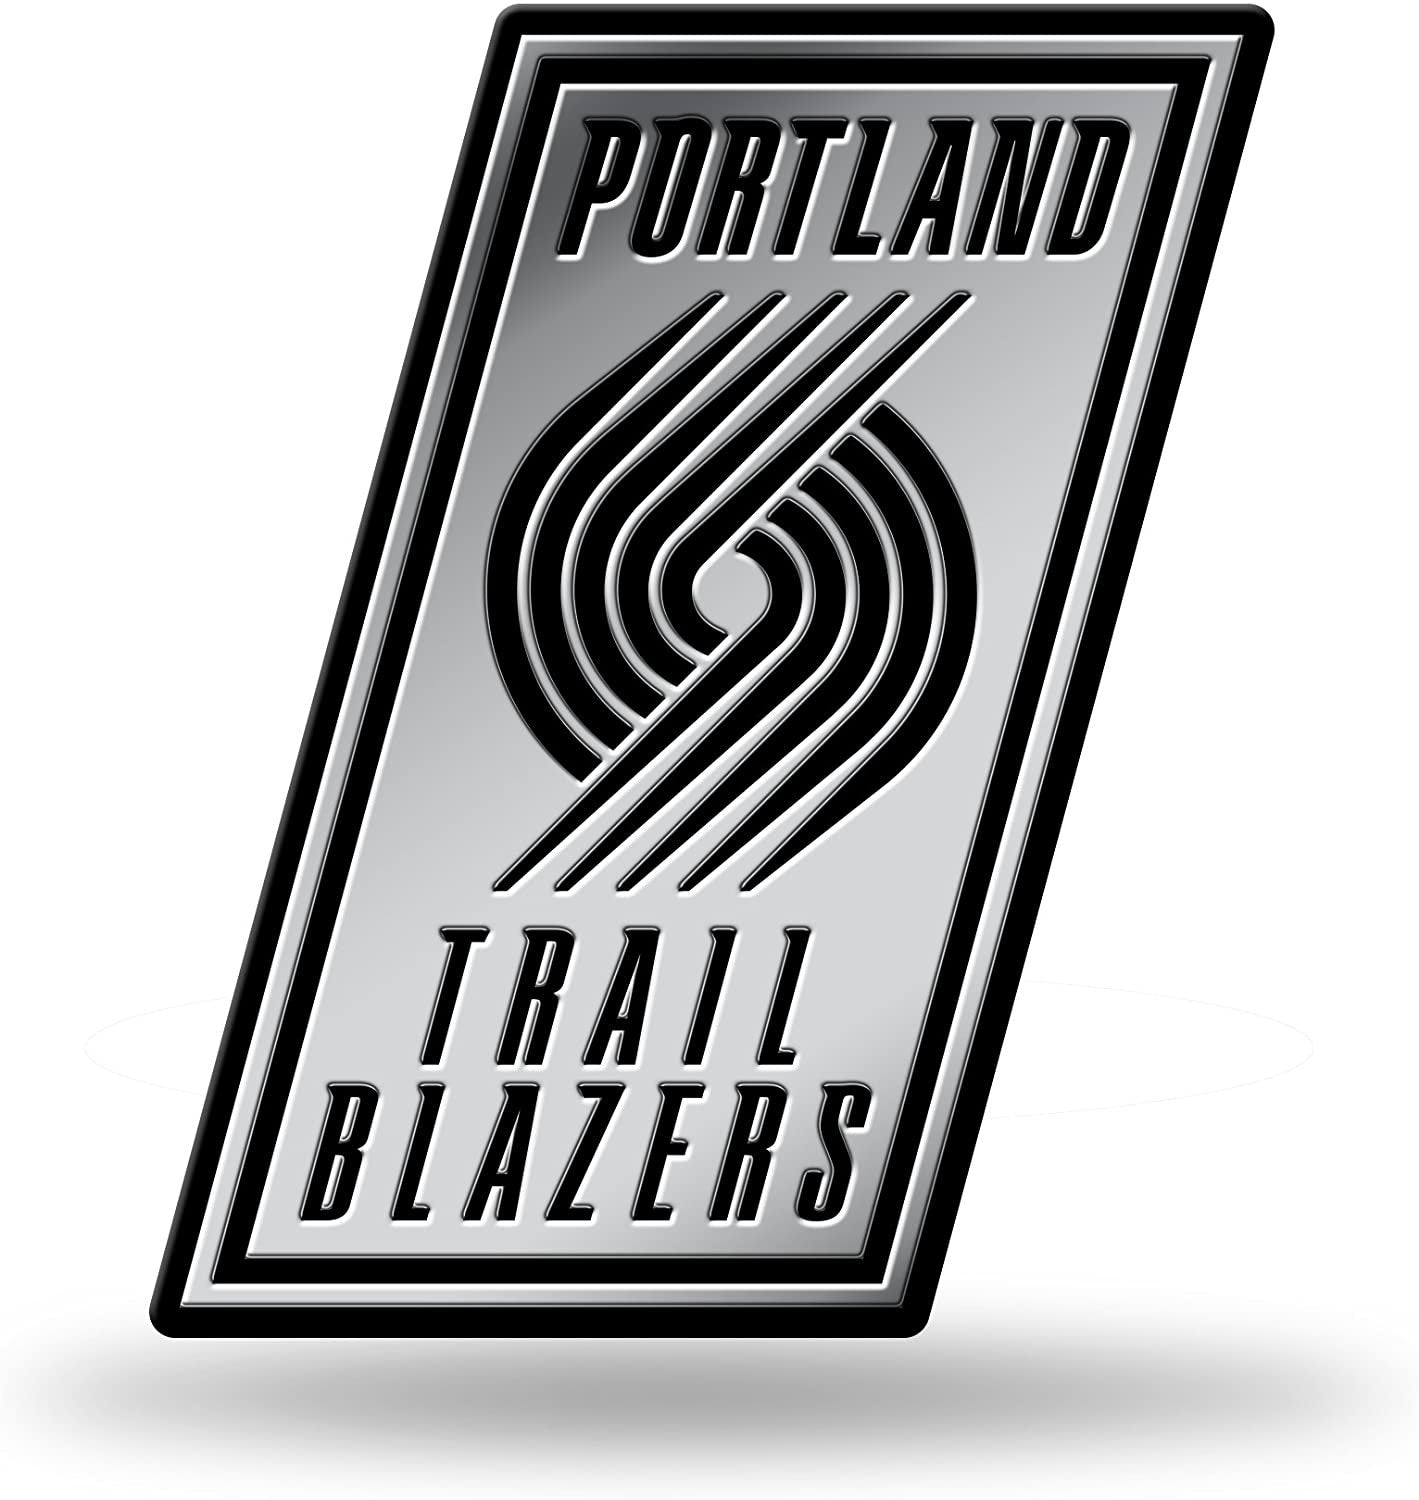 Portland Trail Blazers Silver Chrome Color Auto Emblem, Raised Molded Plastic, 3.5 Inch, Adhesive Tape Backing